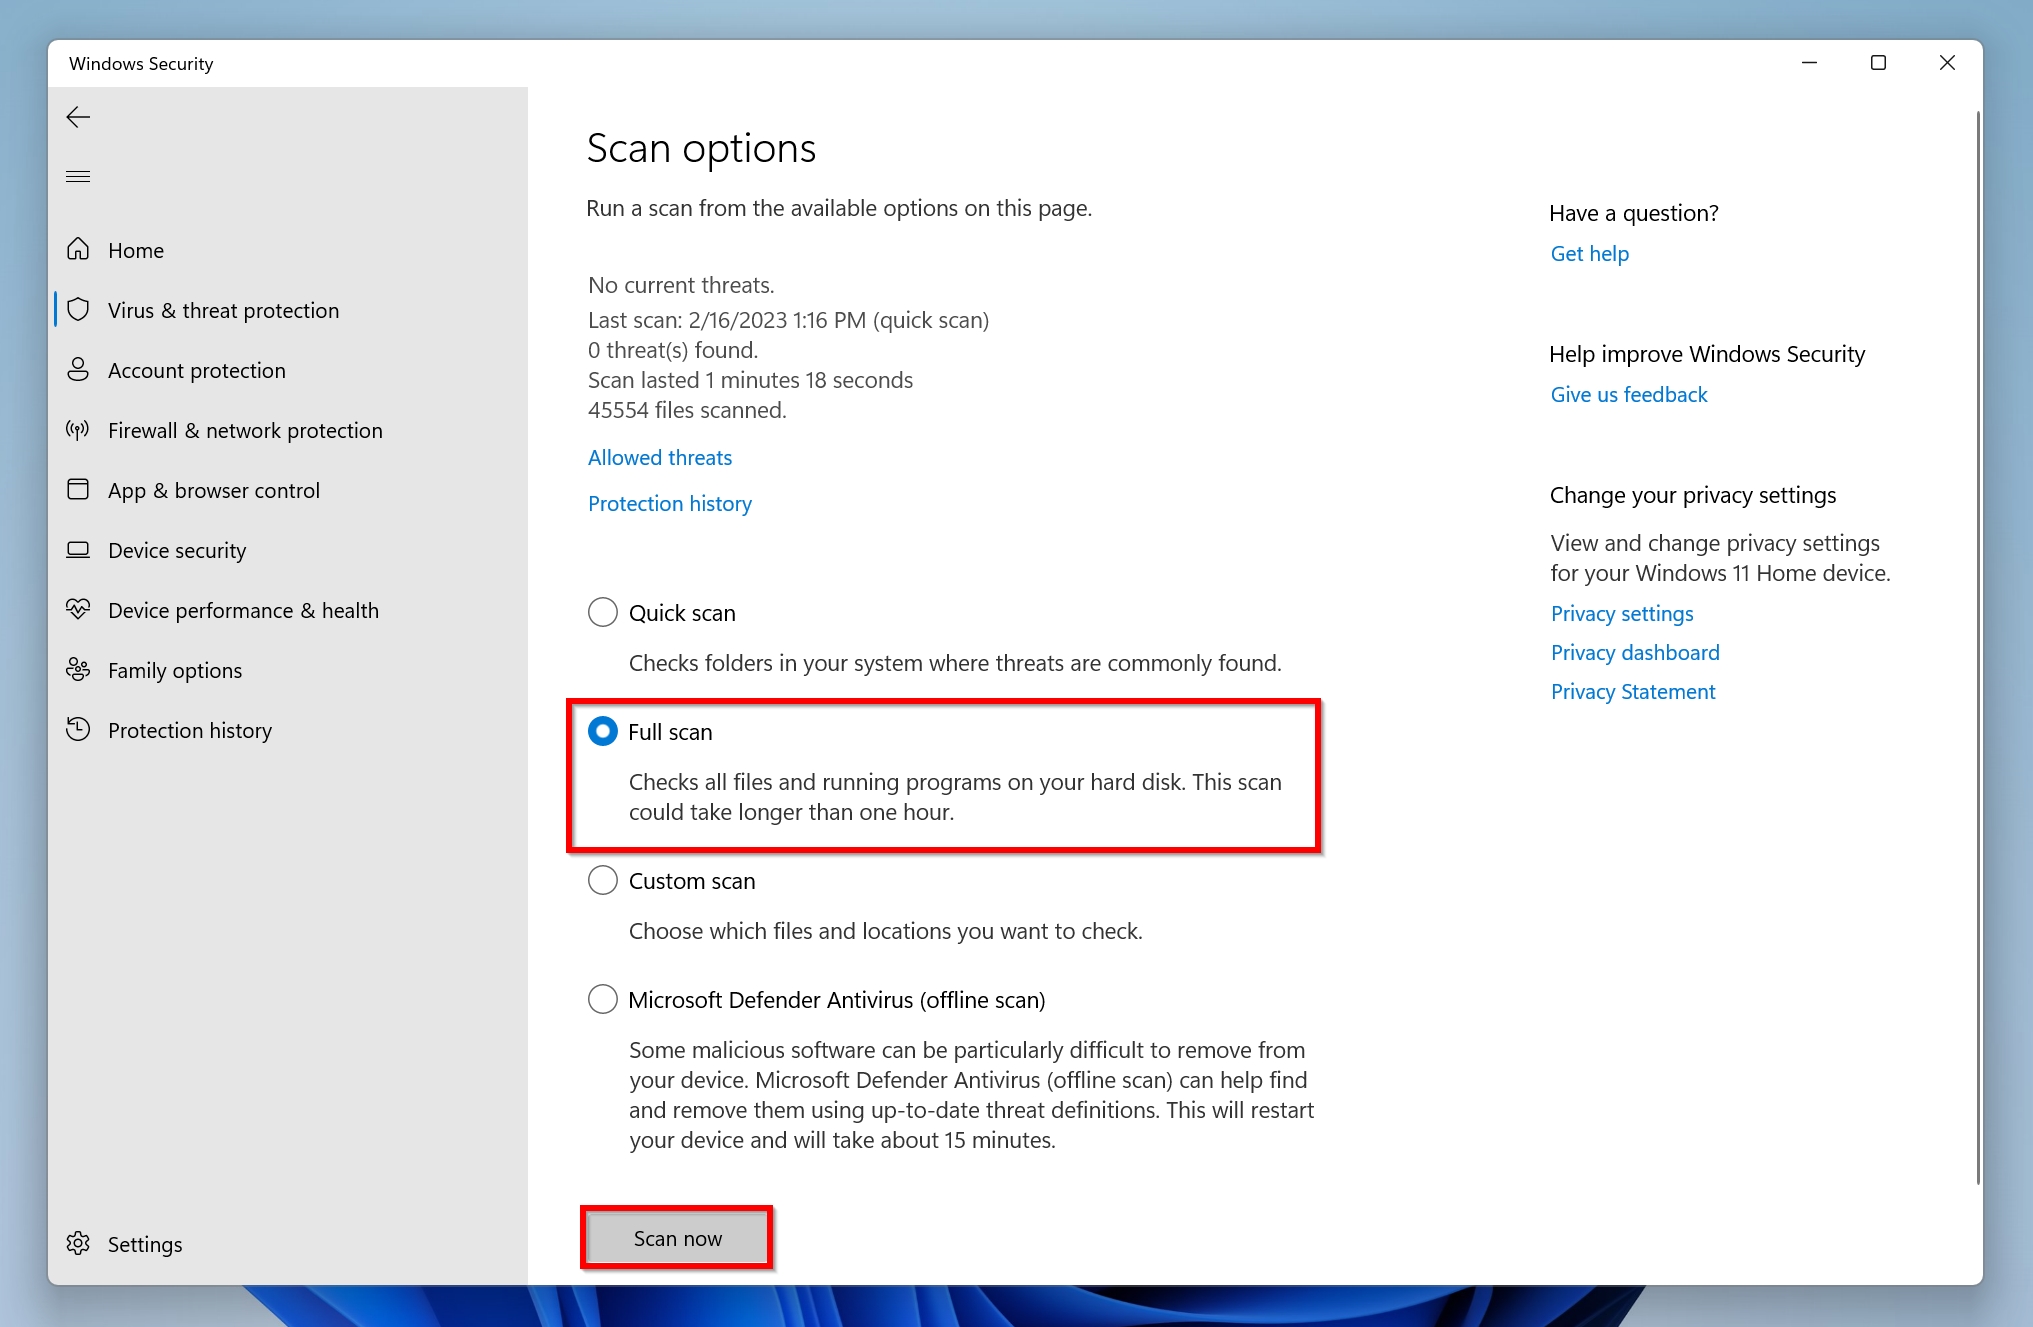 The Full scan option in Windows Defender, along with the Scan now button.